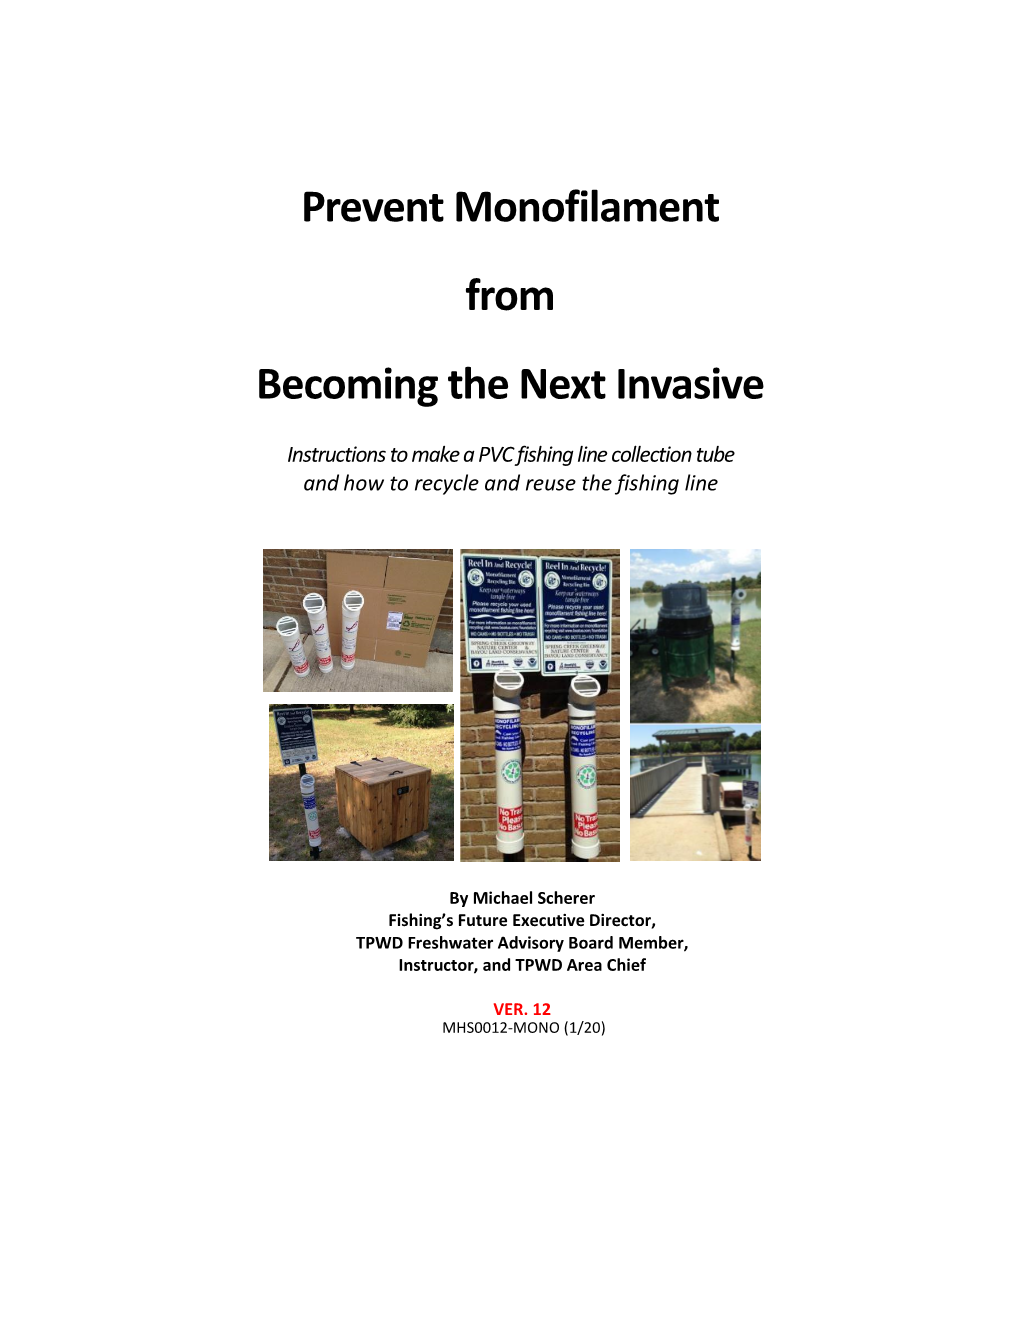 Prevent Monofilament from Becoming the Next Invasive